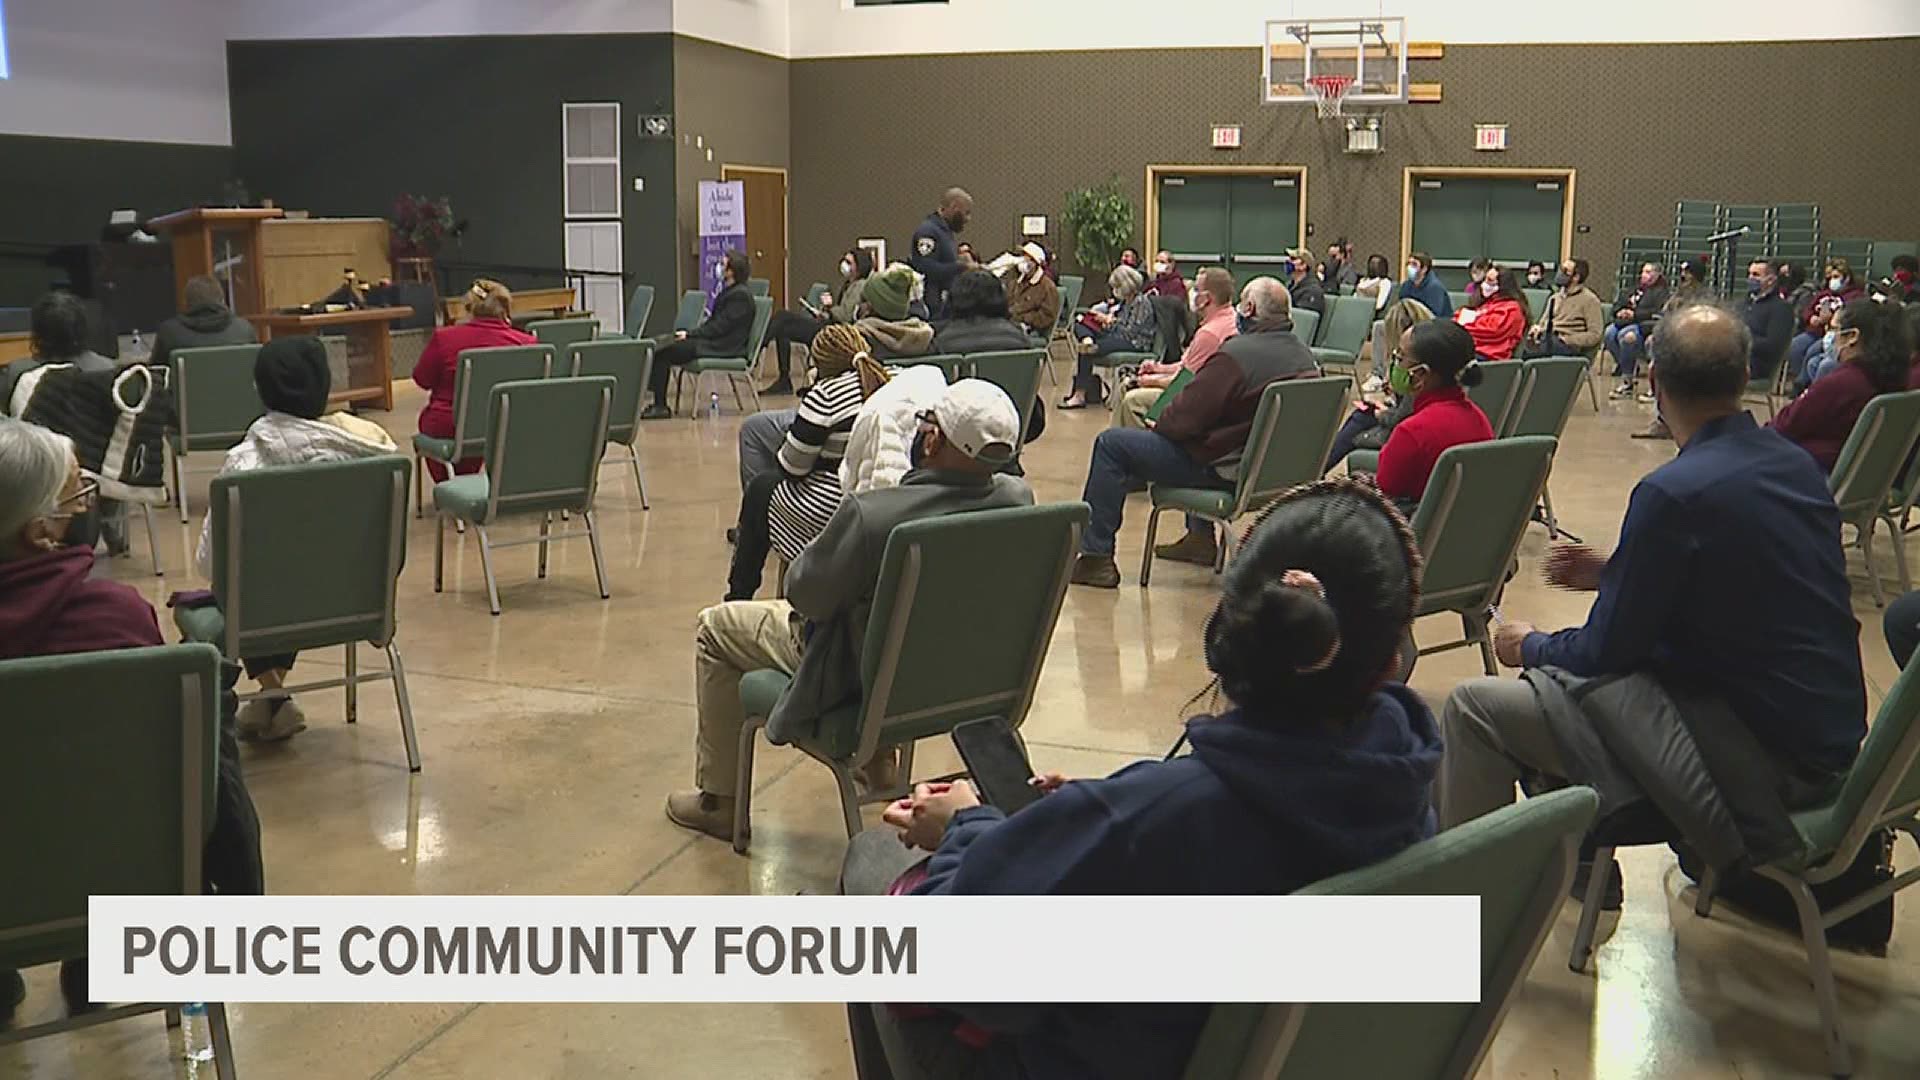 The forum was part of a new approach by Police Commissioner Michael Mouldrow, who was sworn in  with a pledge to reform police interactions with the community.